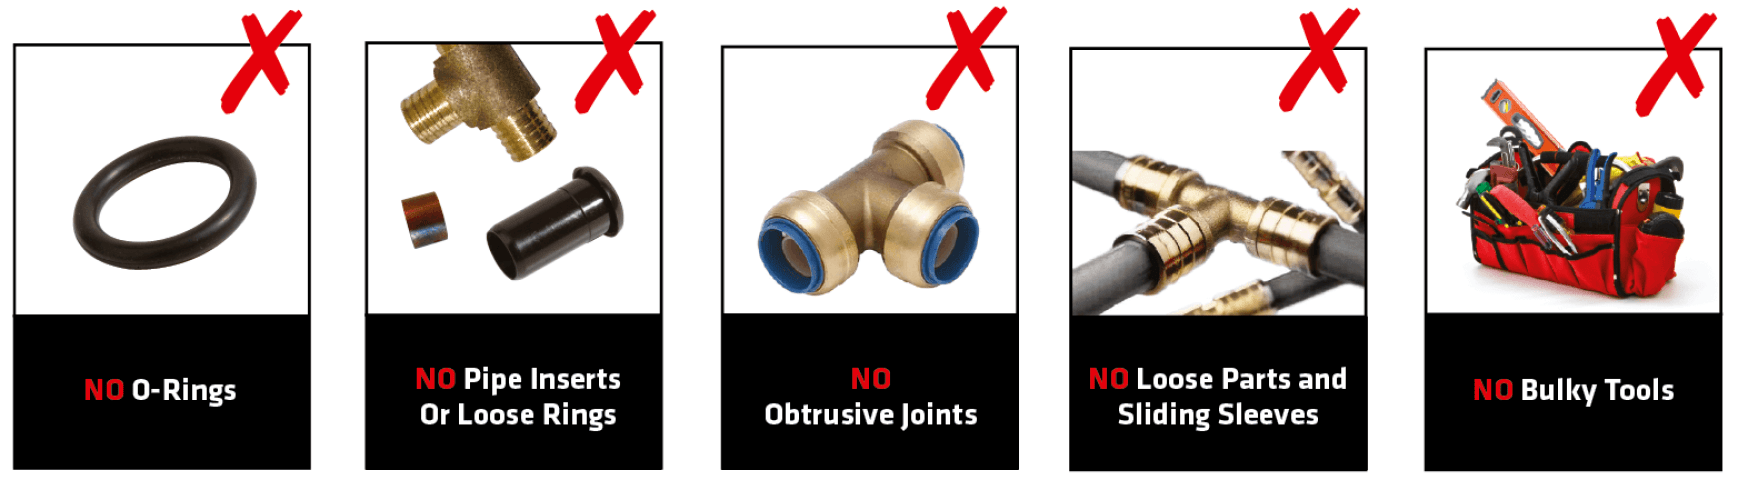 Why Choose Buteline Fittings